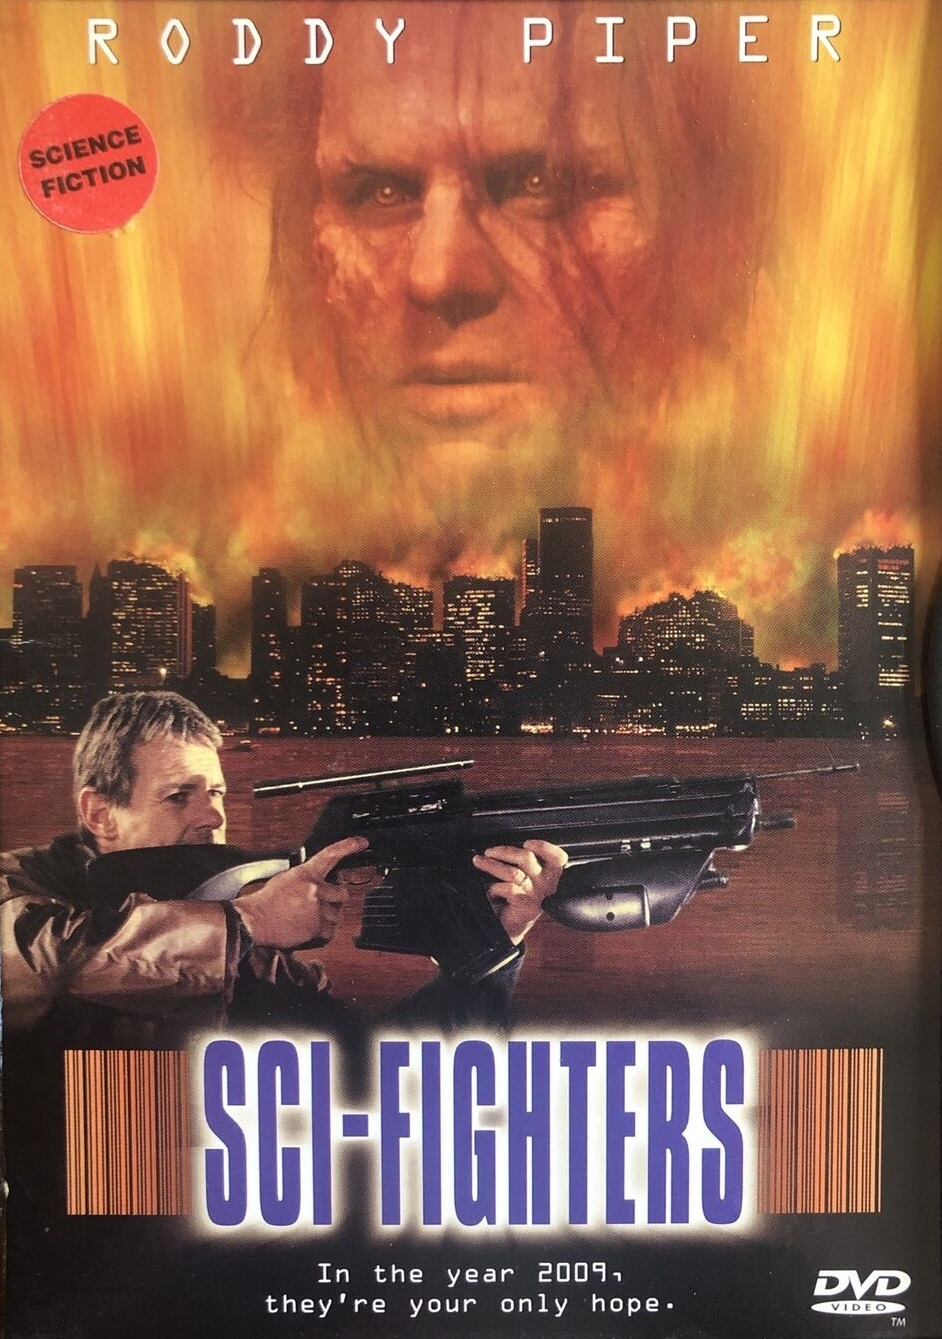 Sci-fighters